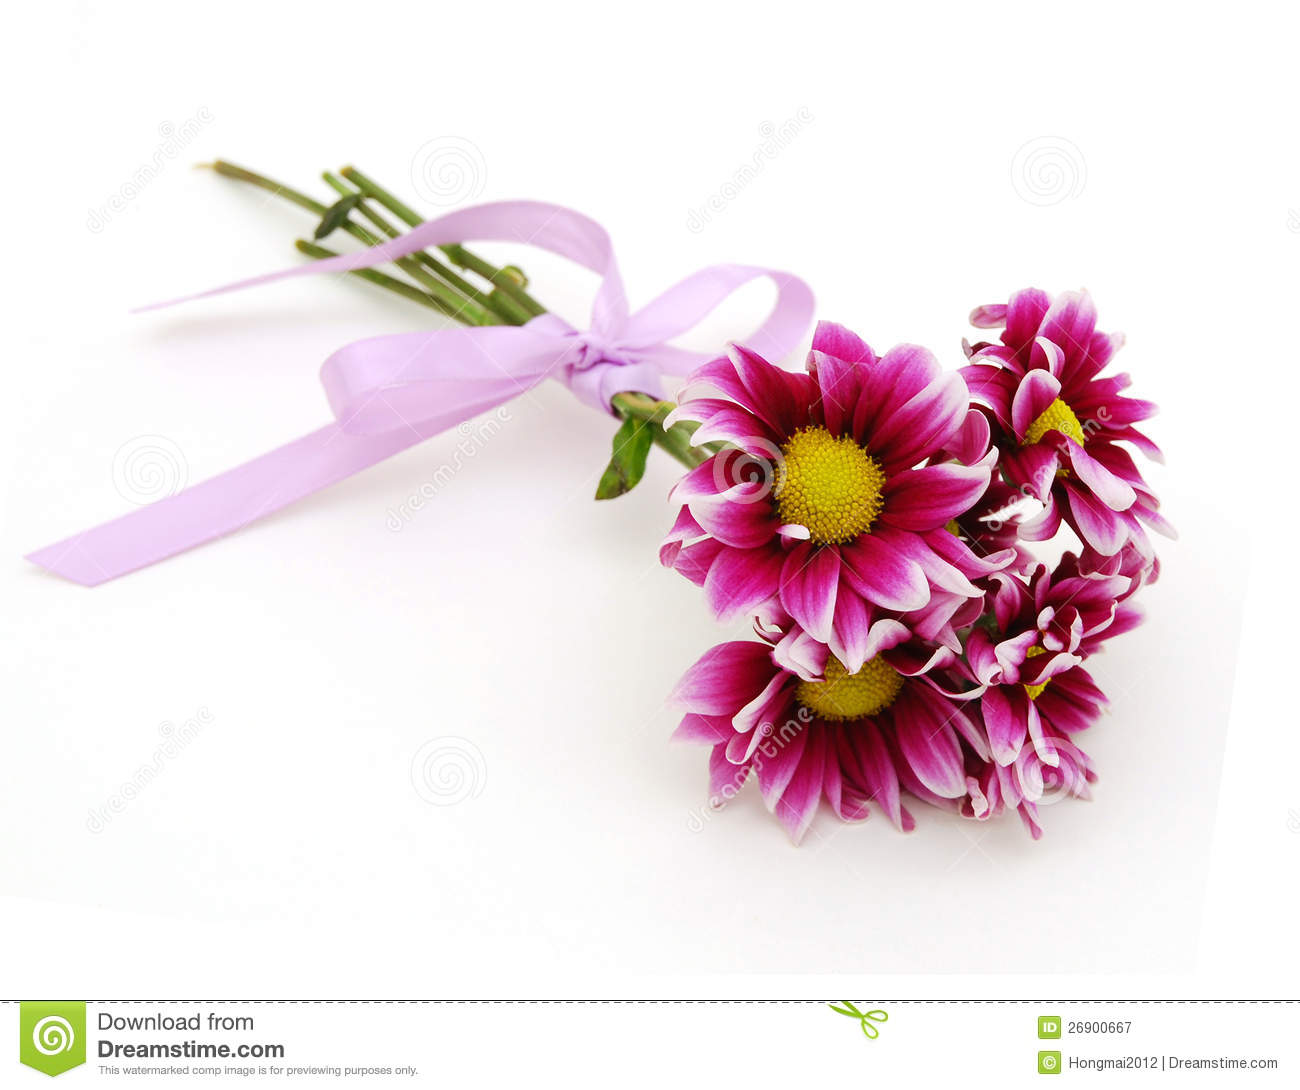 Purple Dahlia Flowers With Yellow Center And White Leaf Edges Isolated